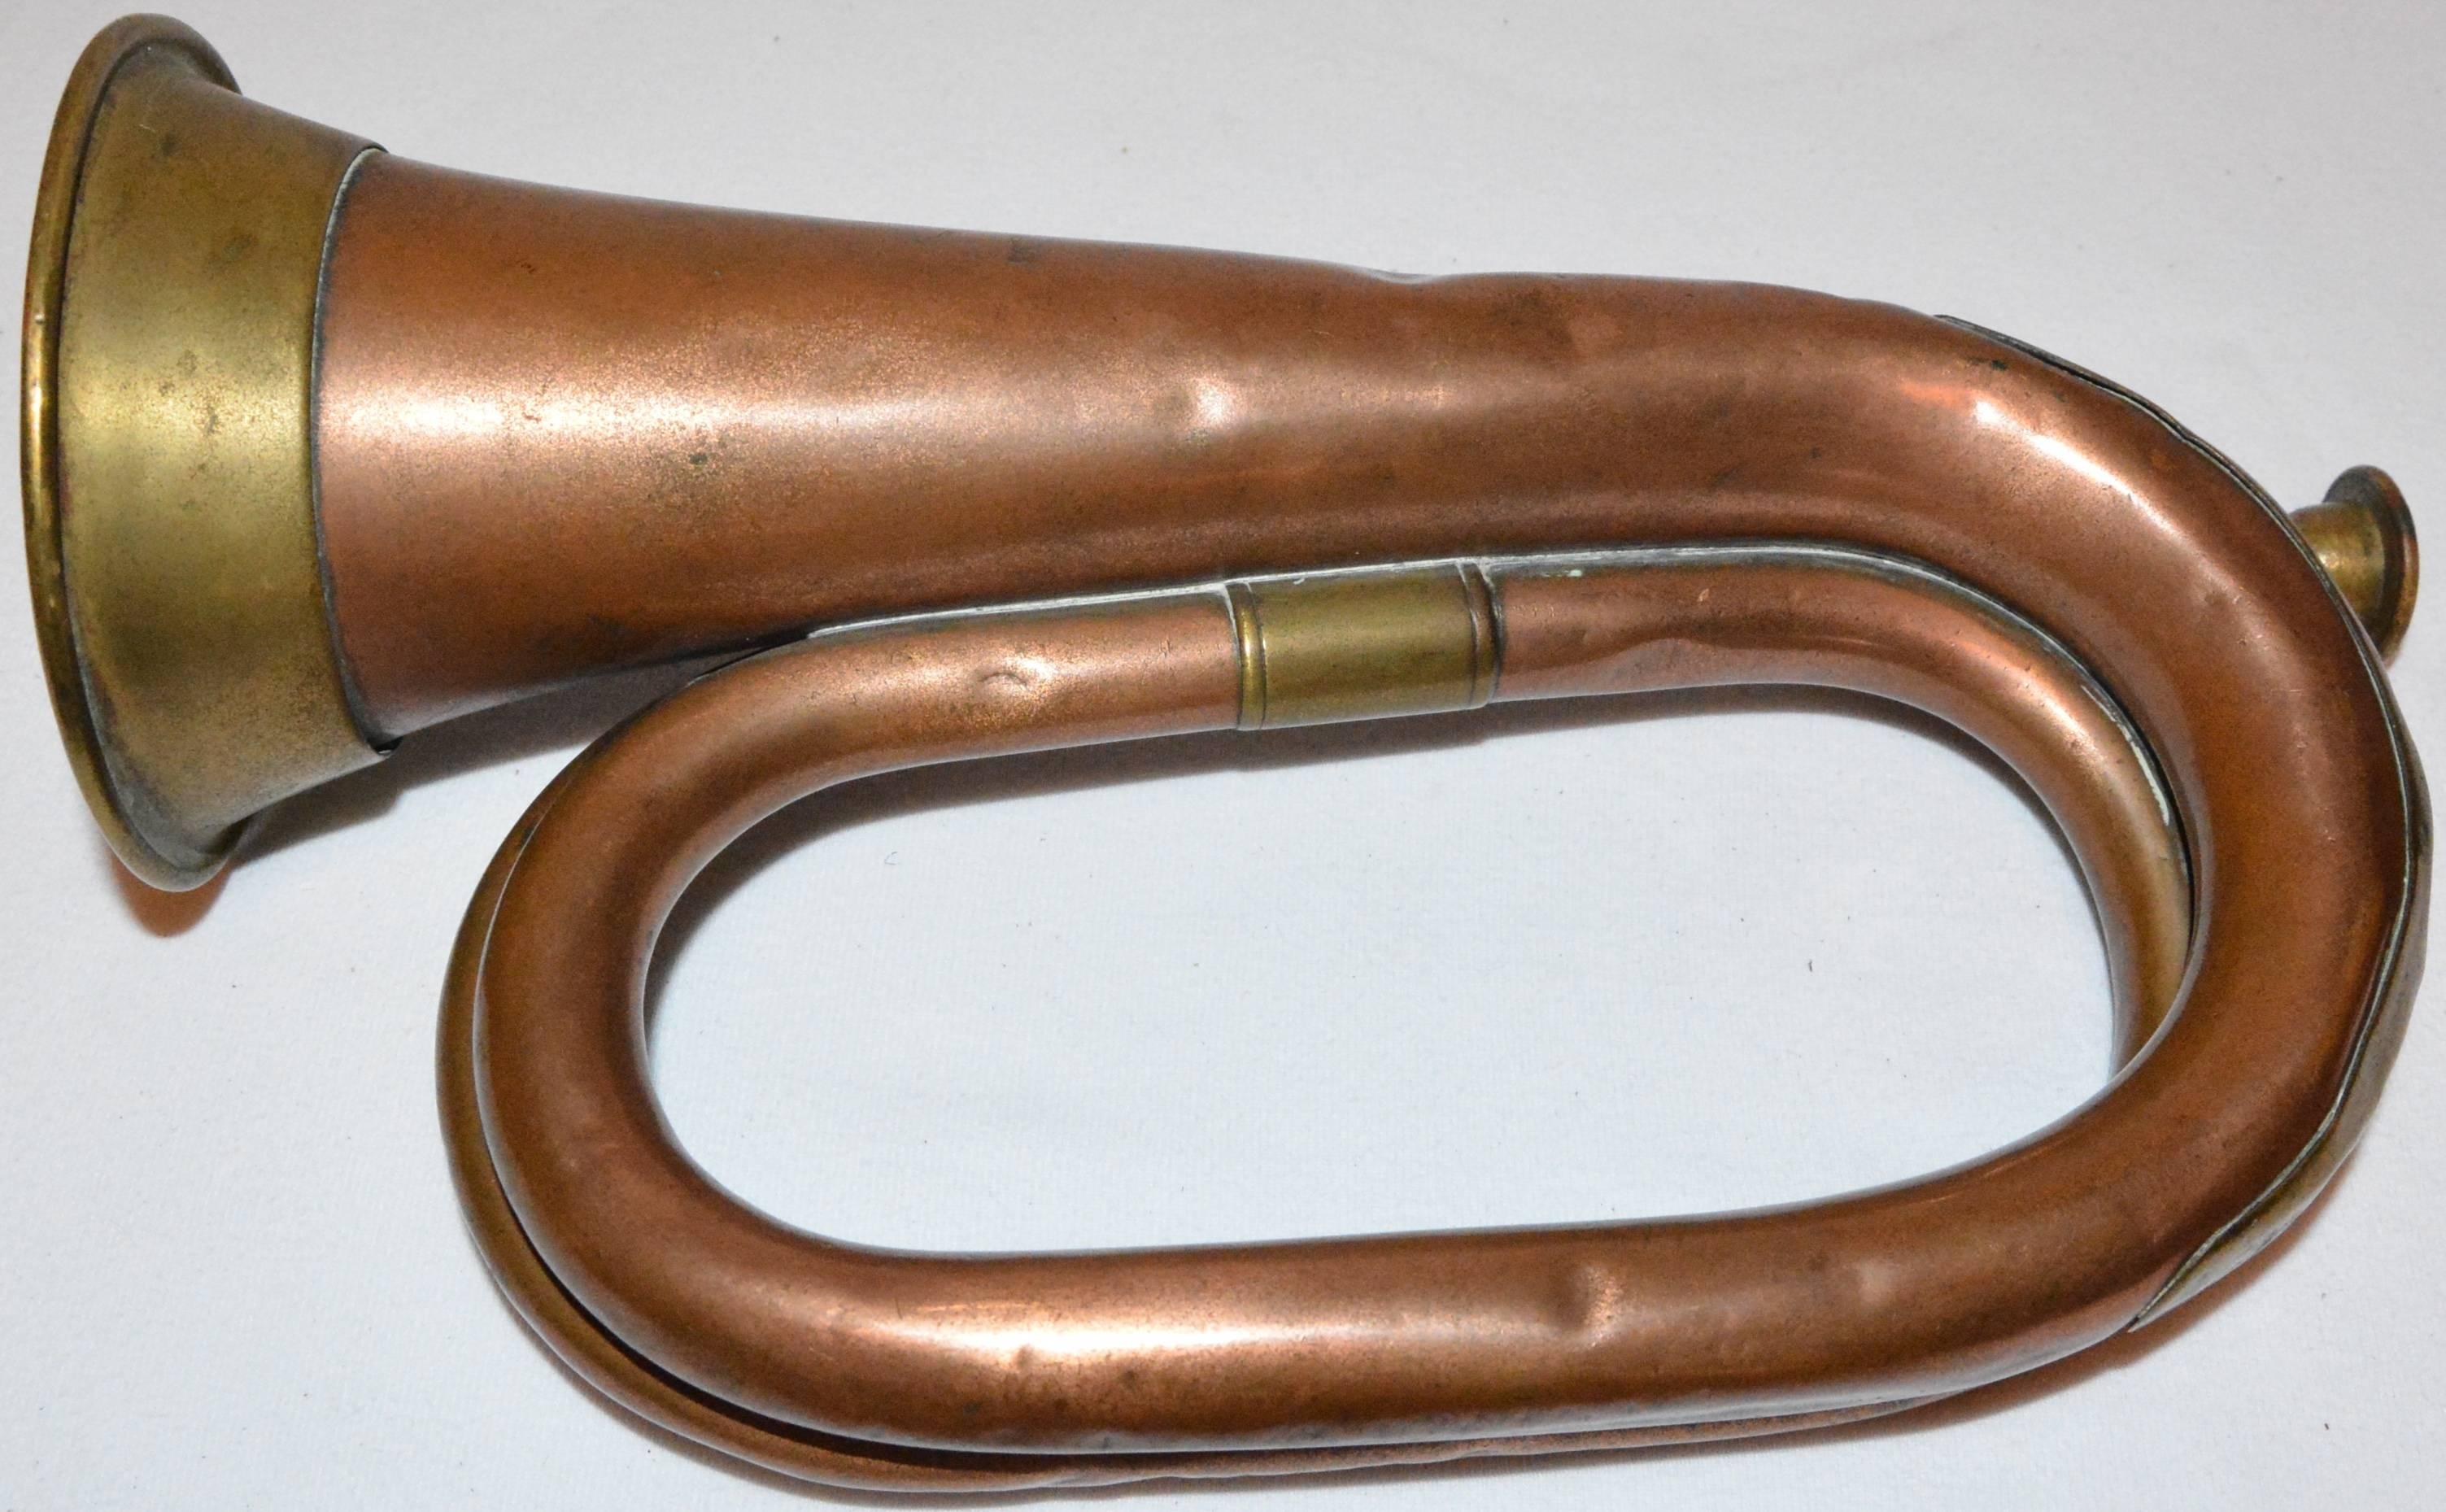 Great Britain (UK) 1941 World War II Henry Pottery & Co. British Copper and Brass Military Bugle